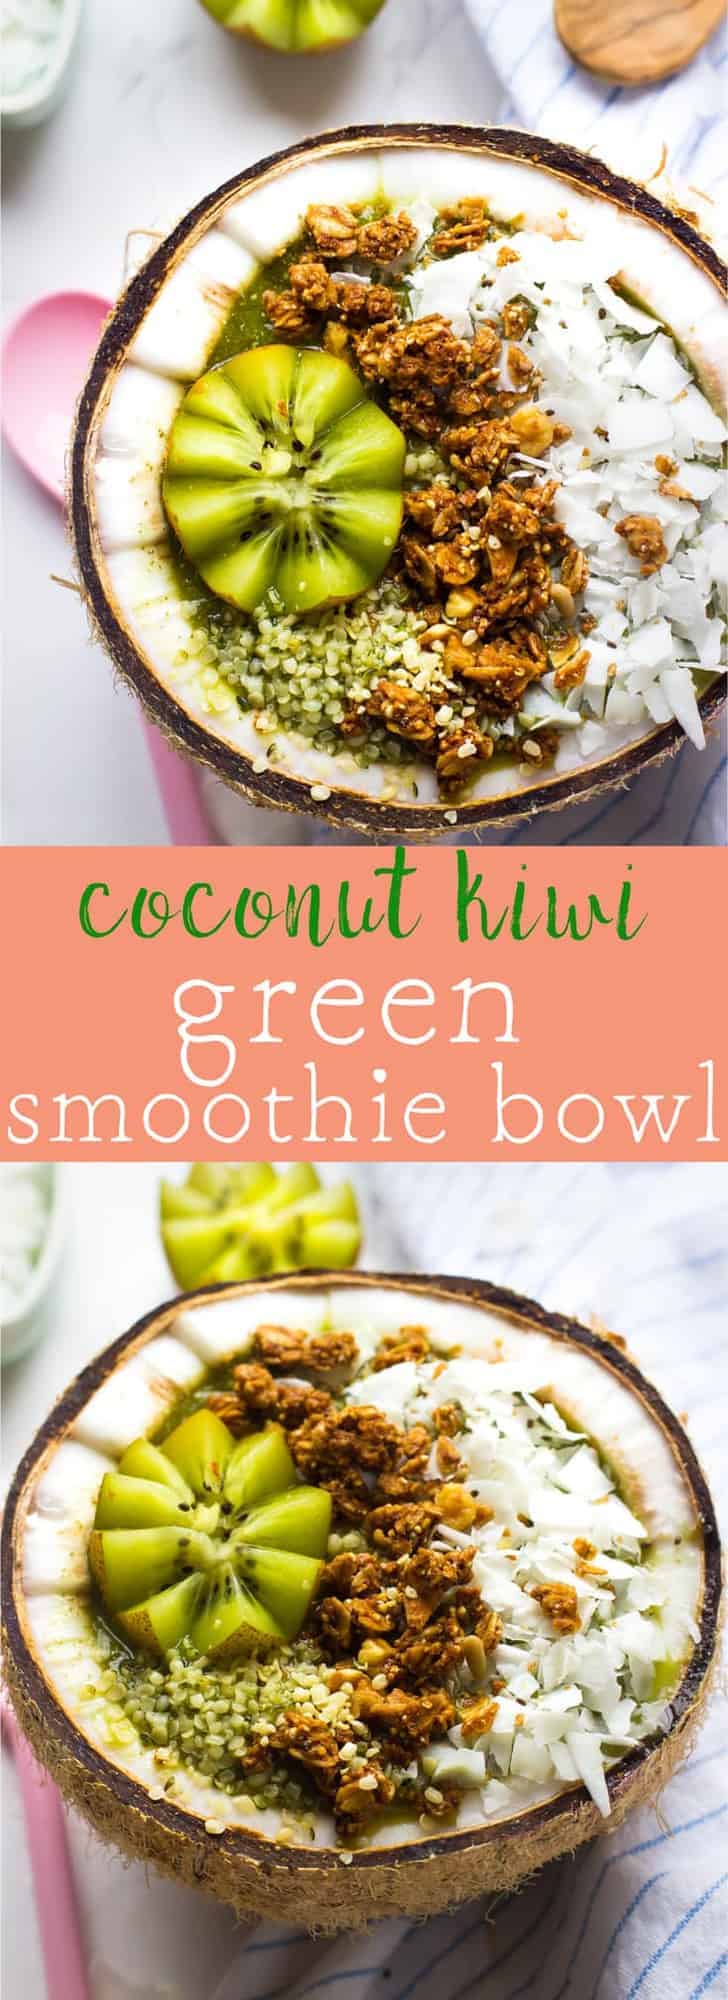 This Coconut Kiwi Green Smoothie Bowl is a healthy tropical smoothie bowl, perfect for quick mornings and takes only 10 minutes to make! via https://jessicainthekitchen.com